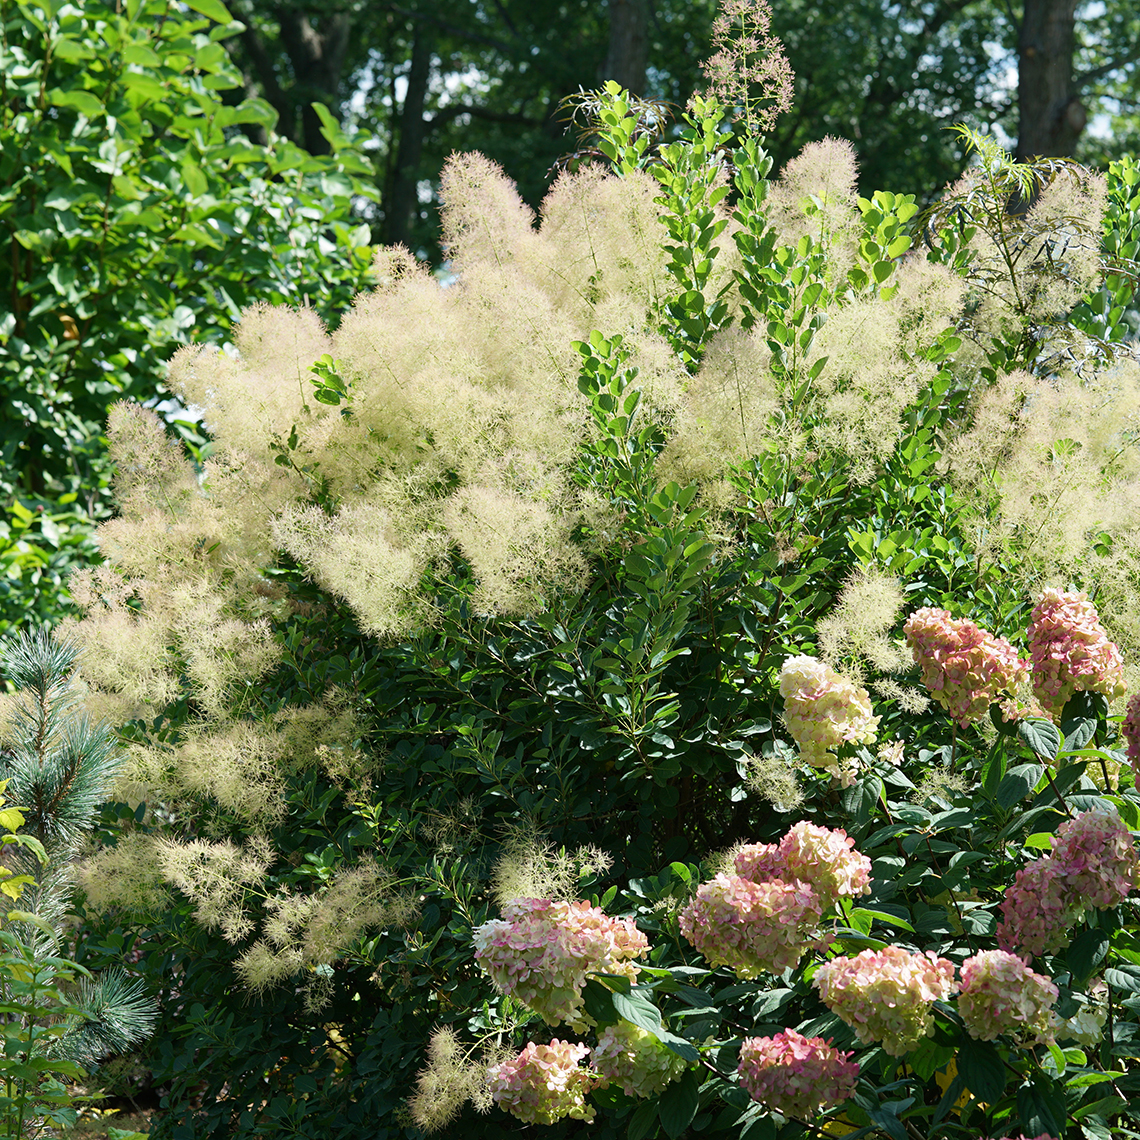 Cotinus Young Lady blooming in garden with Hydrangea paniculata